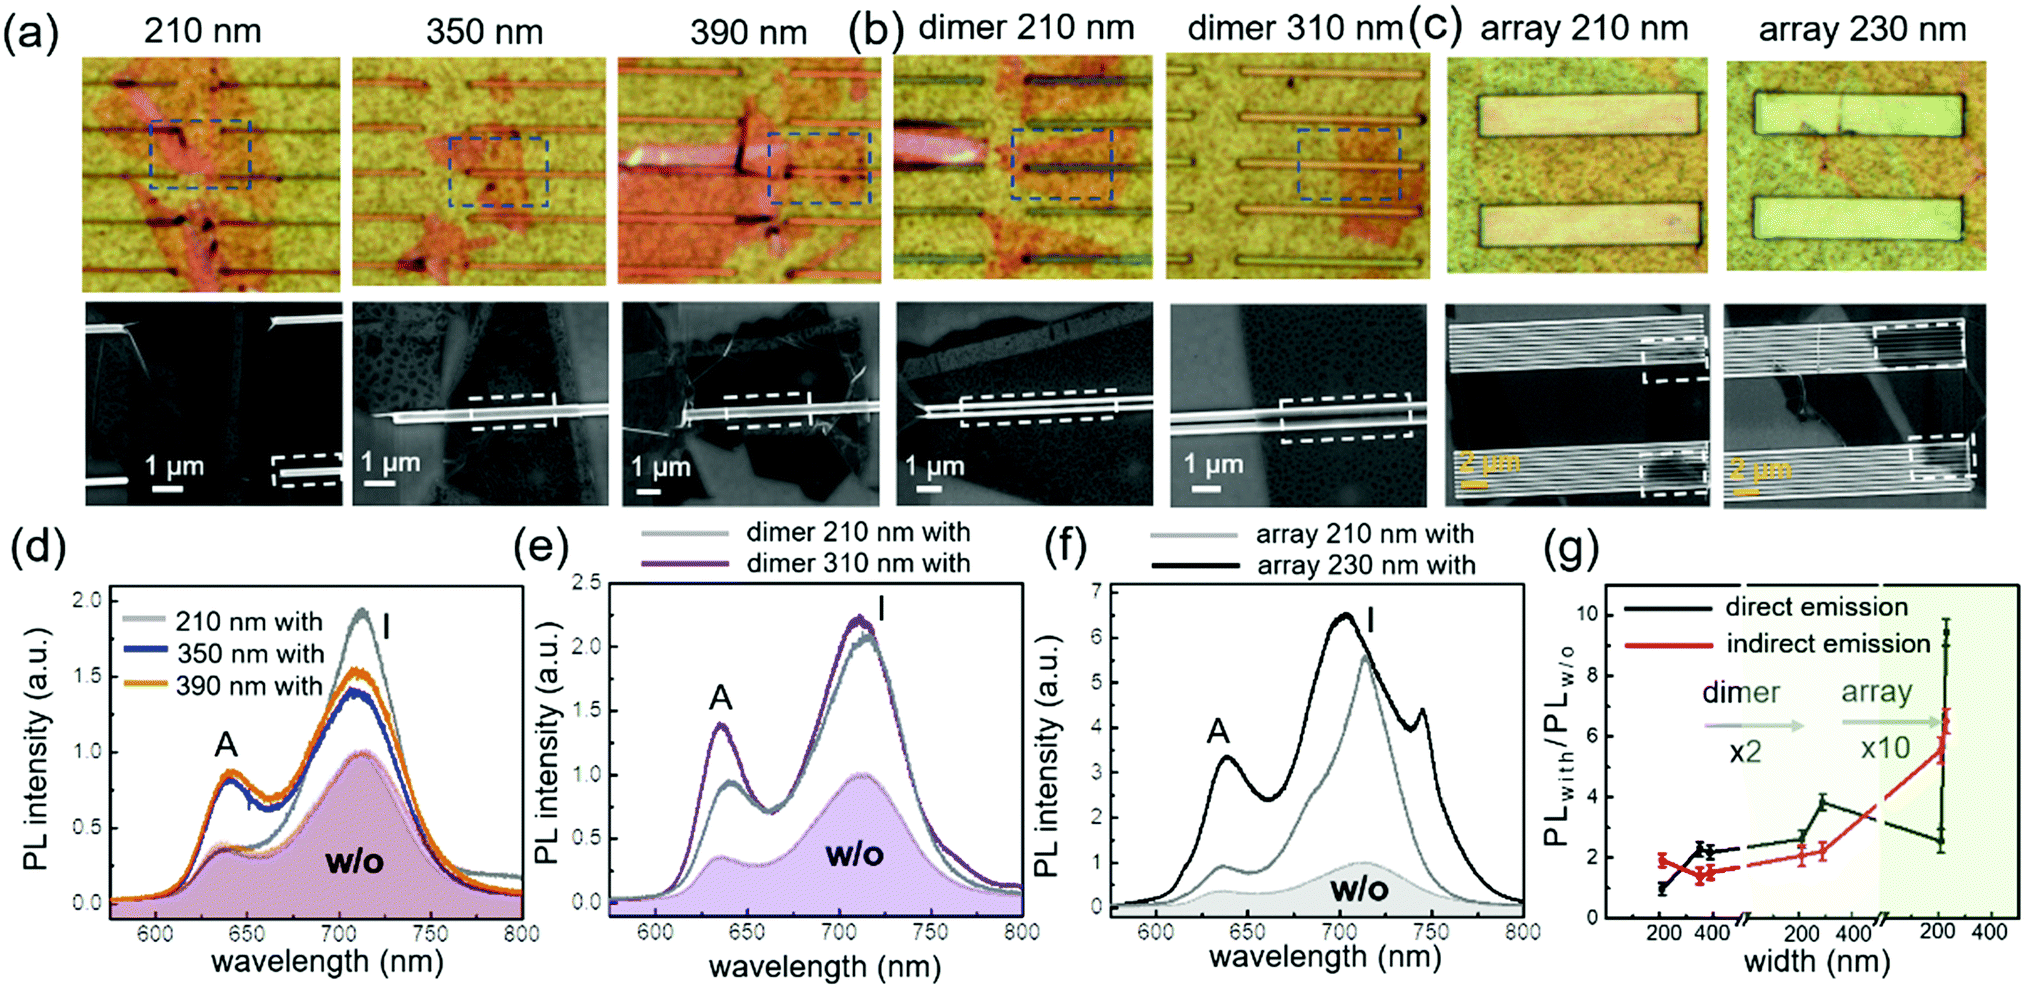 Enhancement Of Exciton Emission In Ws2 Based On The Kerker Effect From The Mode Engineering Of Individual Si Nanostripes Nanoscale Horizons Rsc Publishing